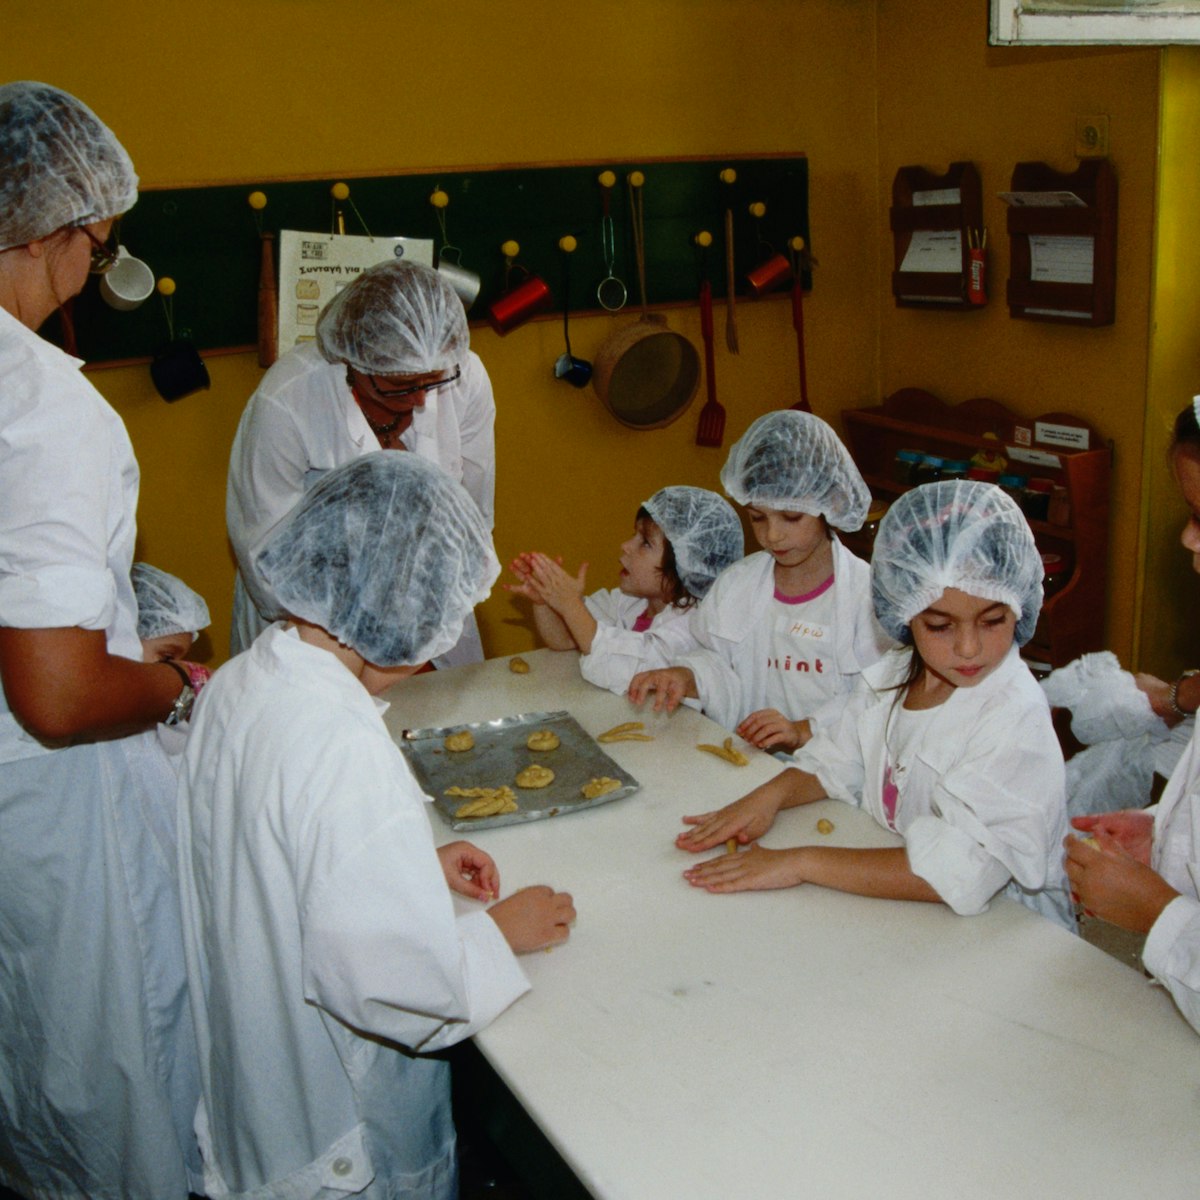 Making cookies in the kitchen at the Children's Museum in Plaka.